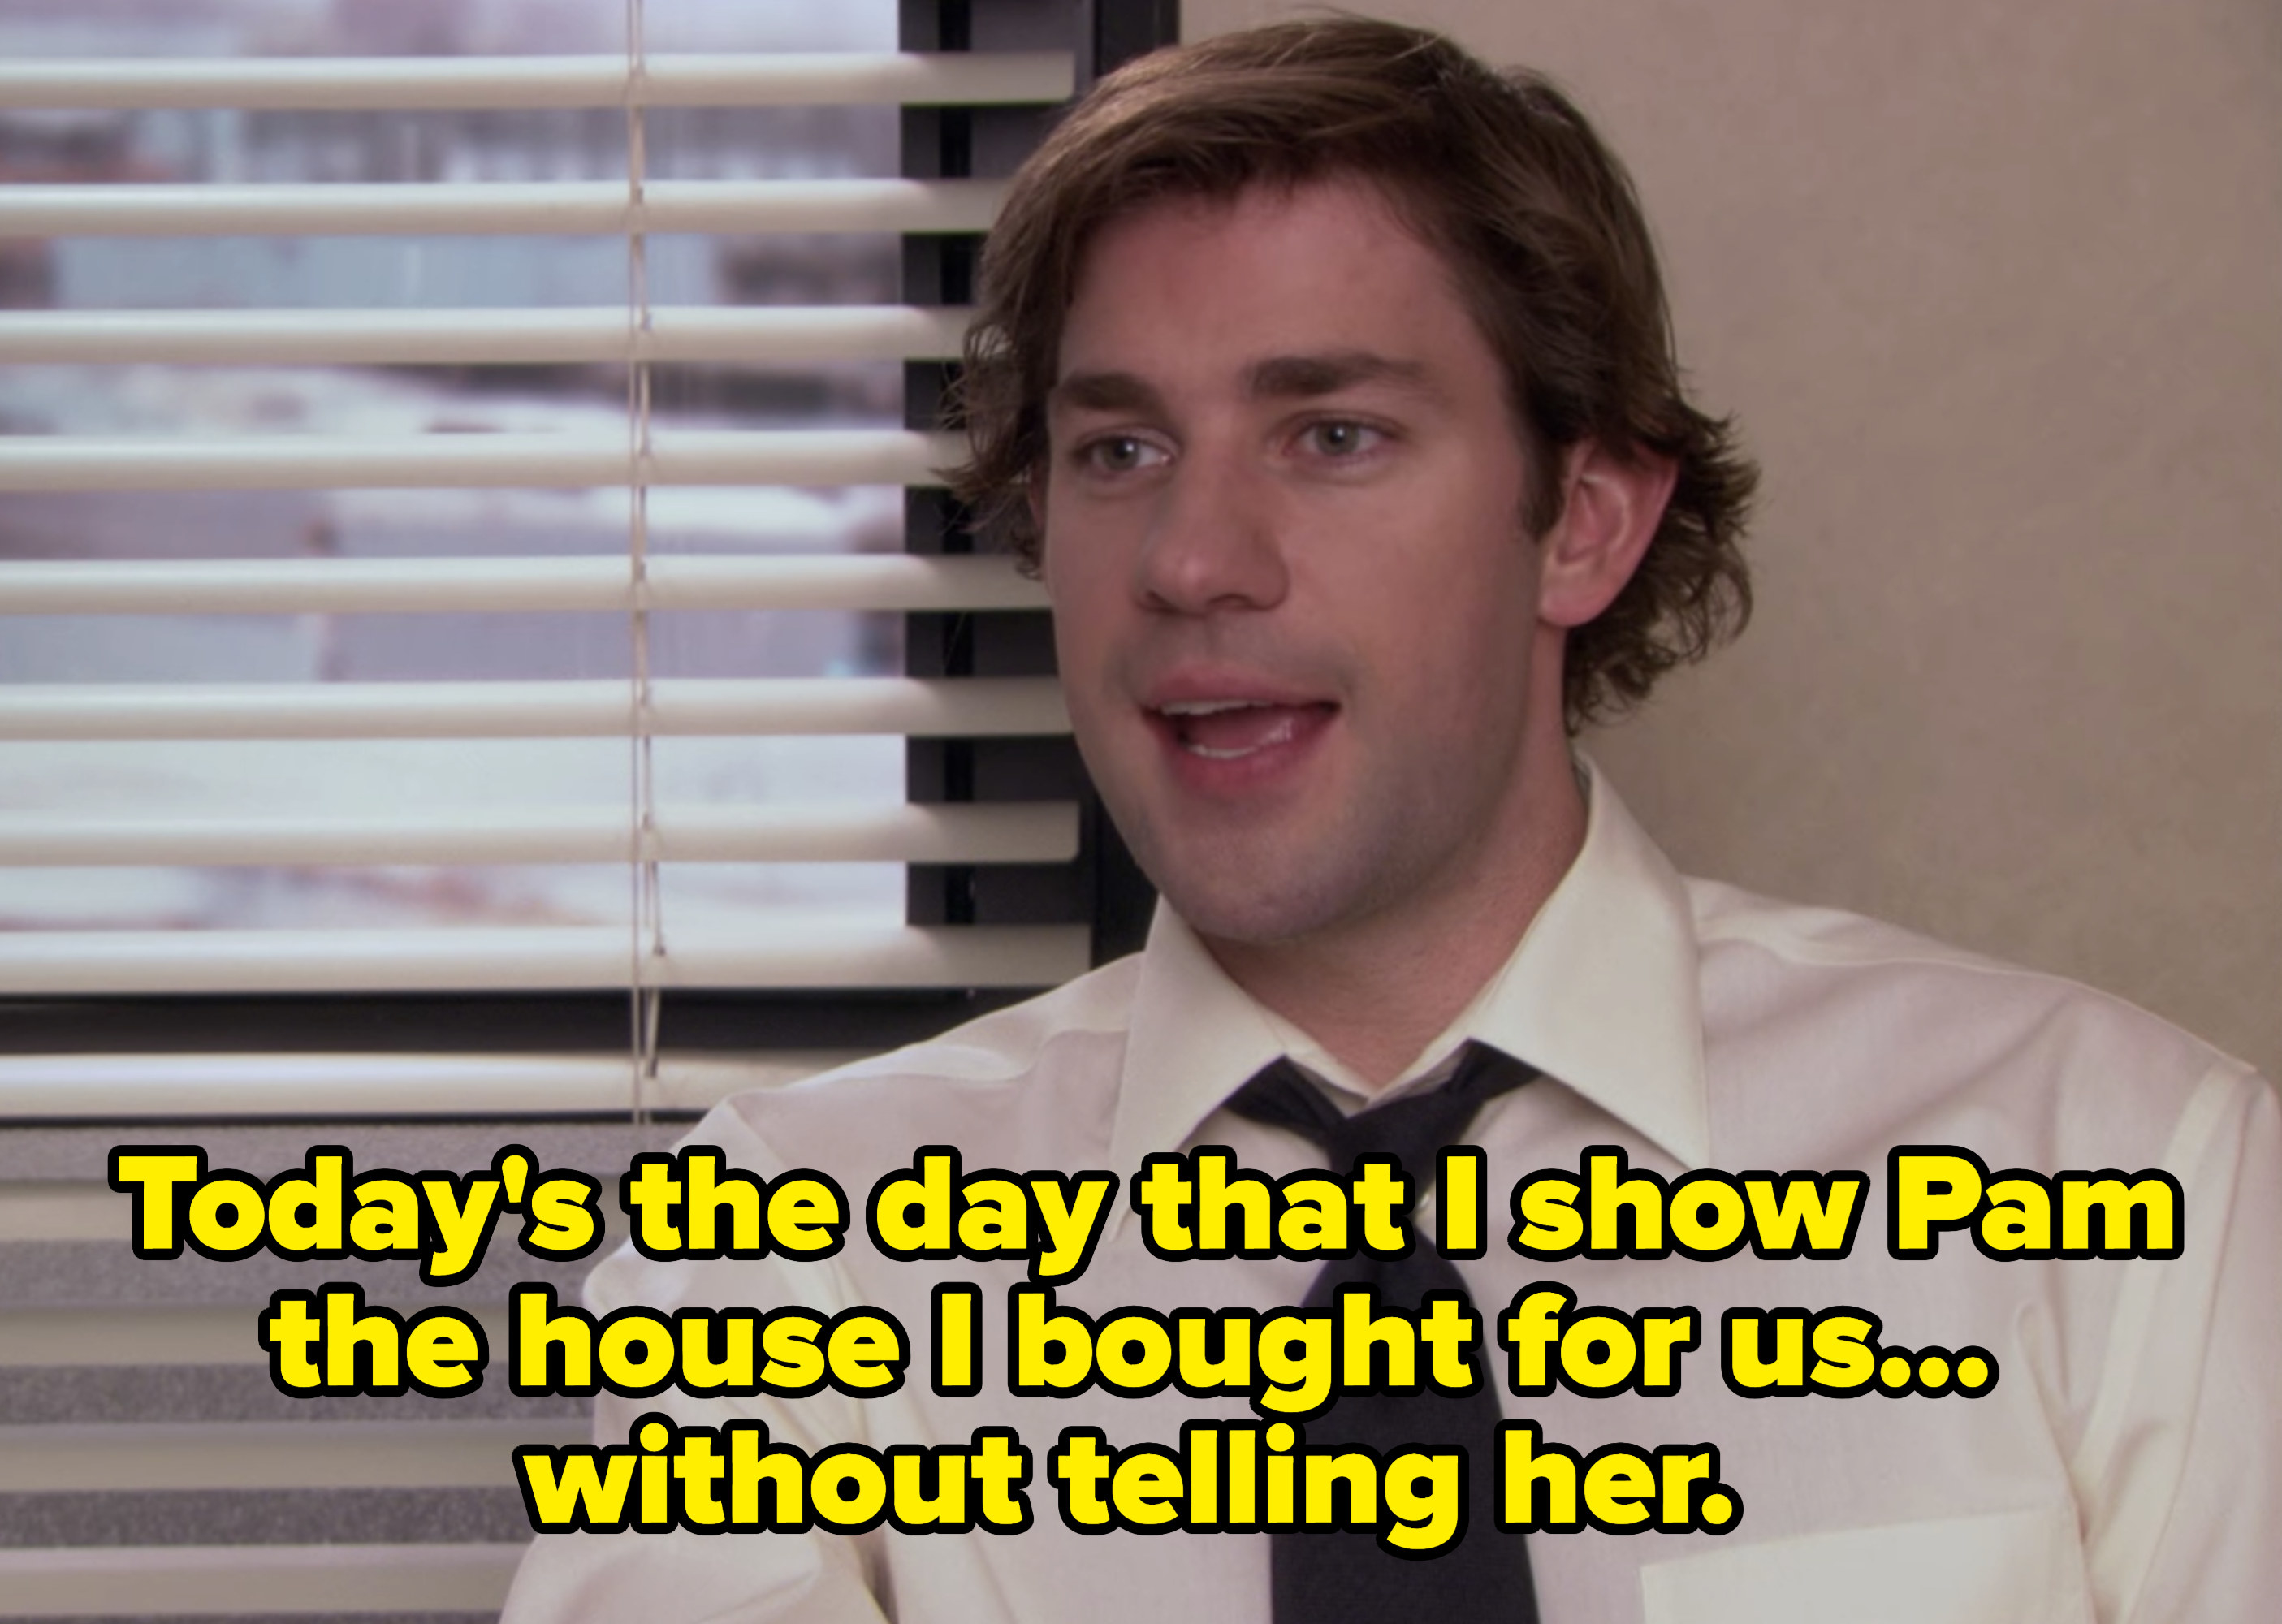 Jim says he bought a house for Pam and didn&#x27;t tell her.